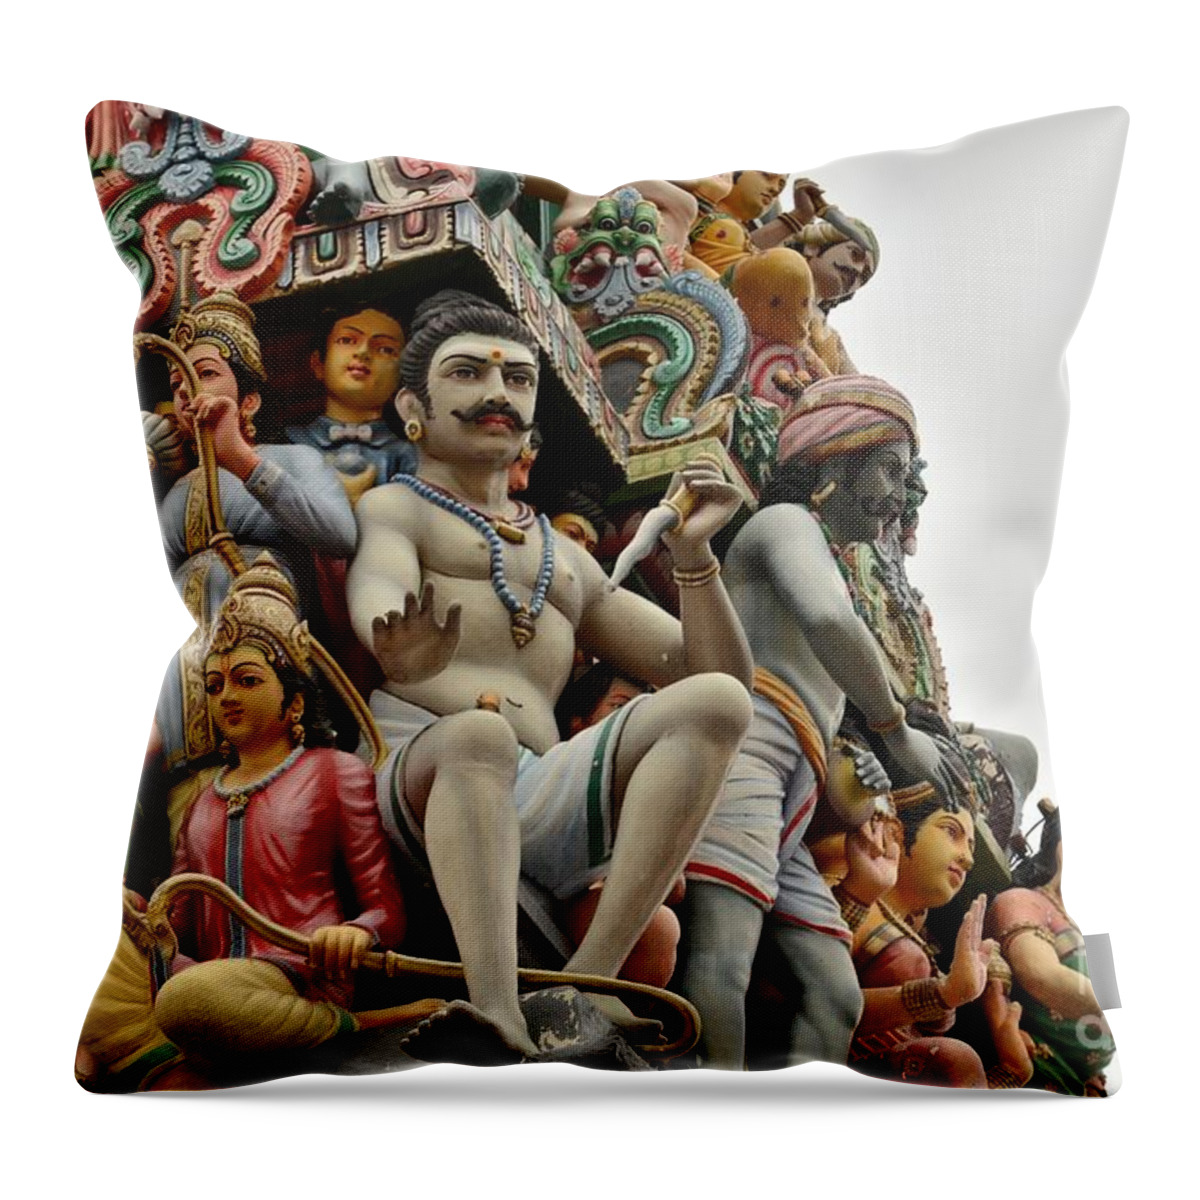 Architecture Throw Pillow featuring the photograph Hindu gods and goddesses at temple by Imran Ahmed